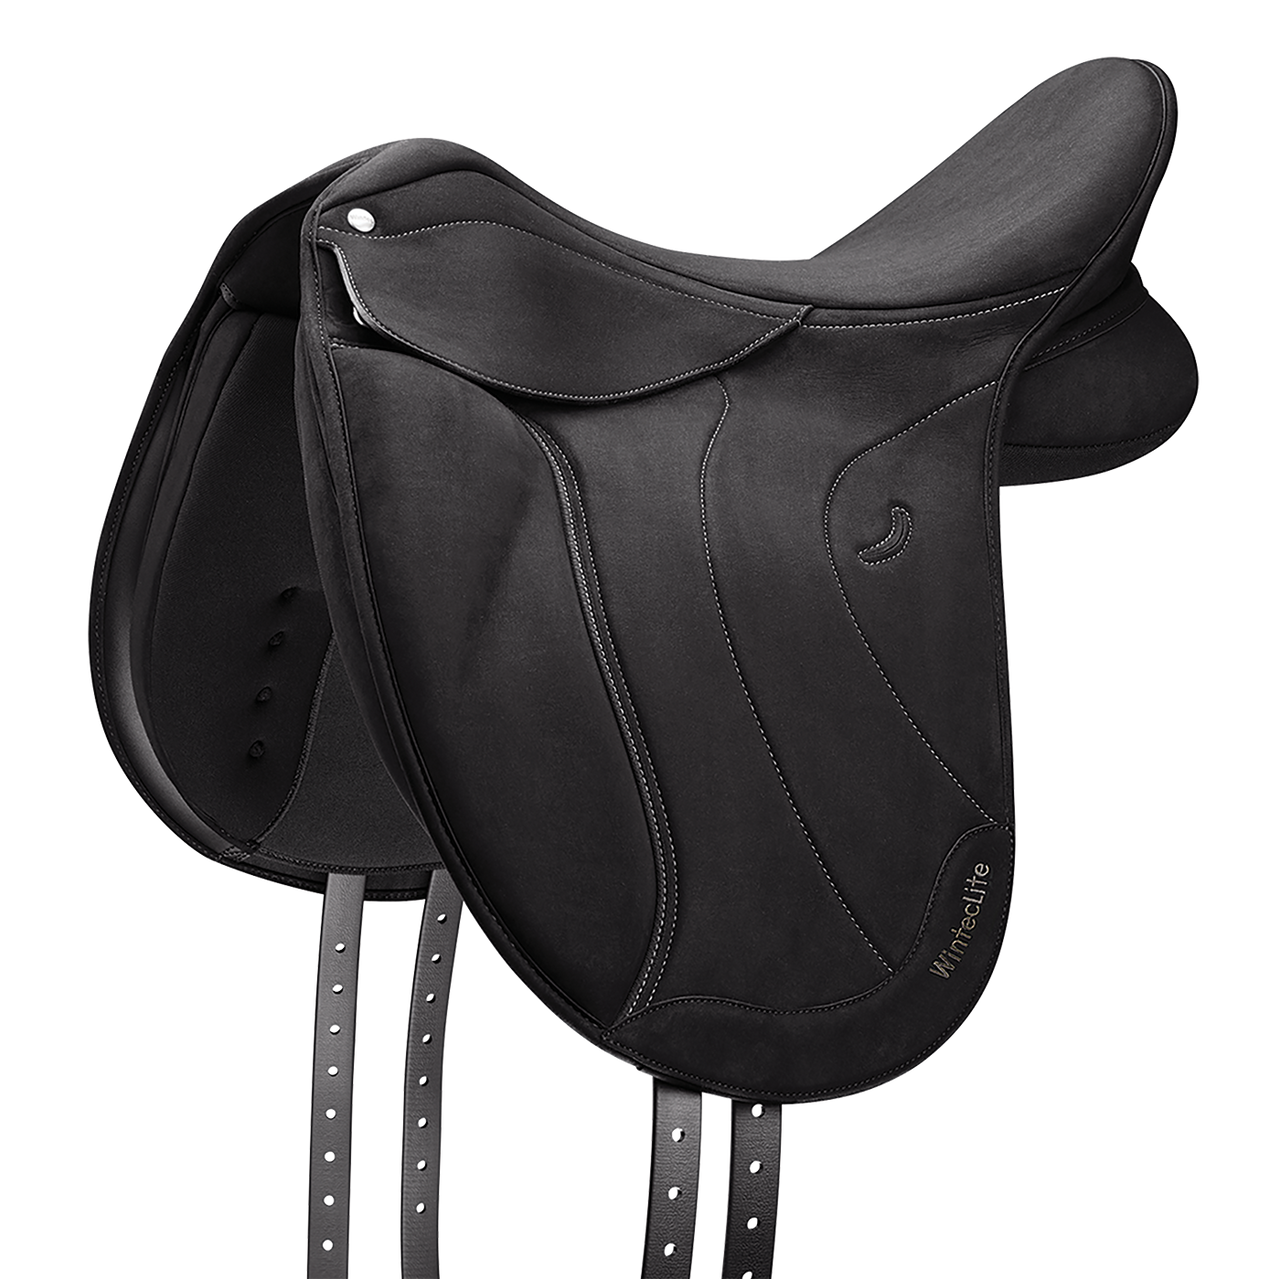 WintecLite Dressage DLux - The Trading Stables